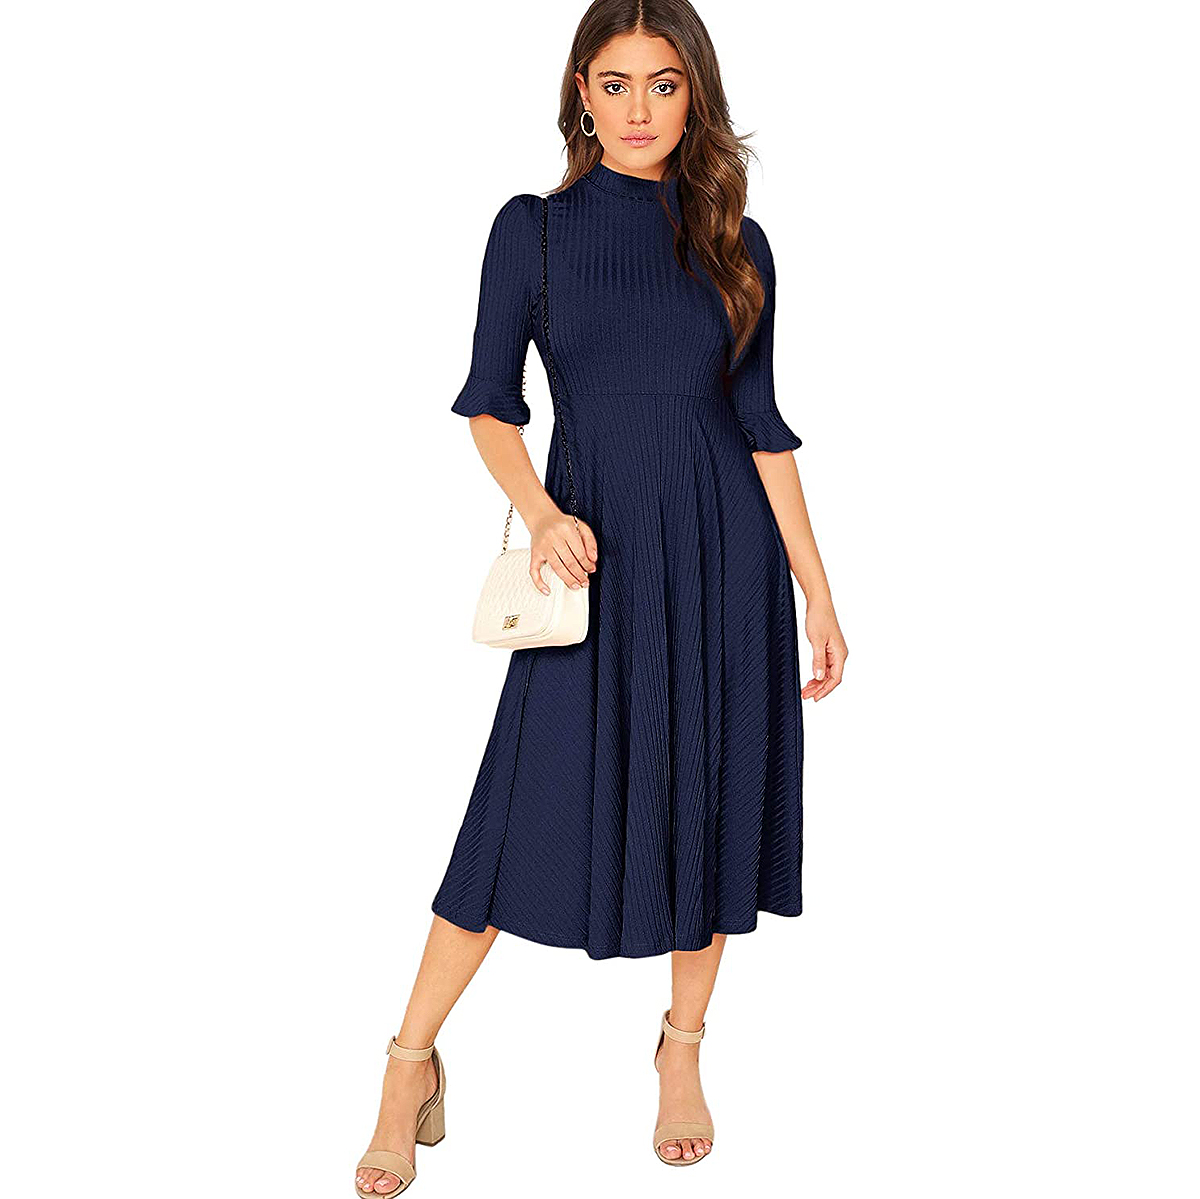 Verdusa Women's Elegant Ribbed Knit Bell Sleeve Fit and Flare Midi Dress 